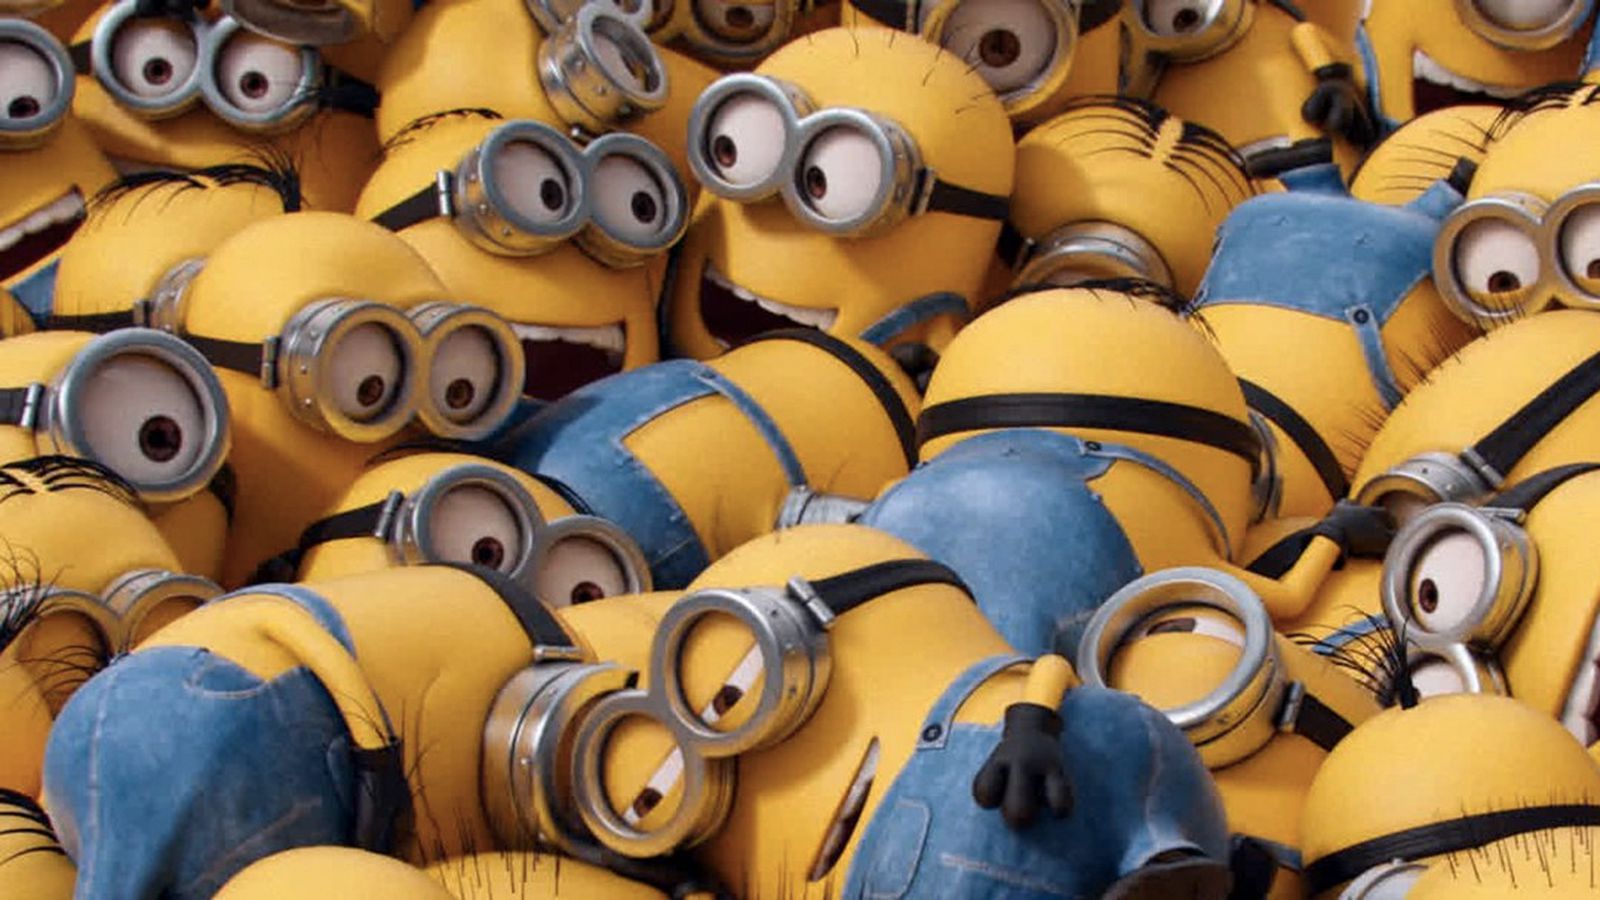 movies ruined with sex scenes - Minions